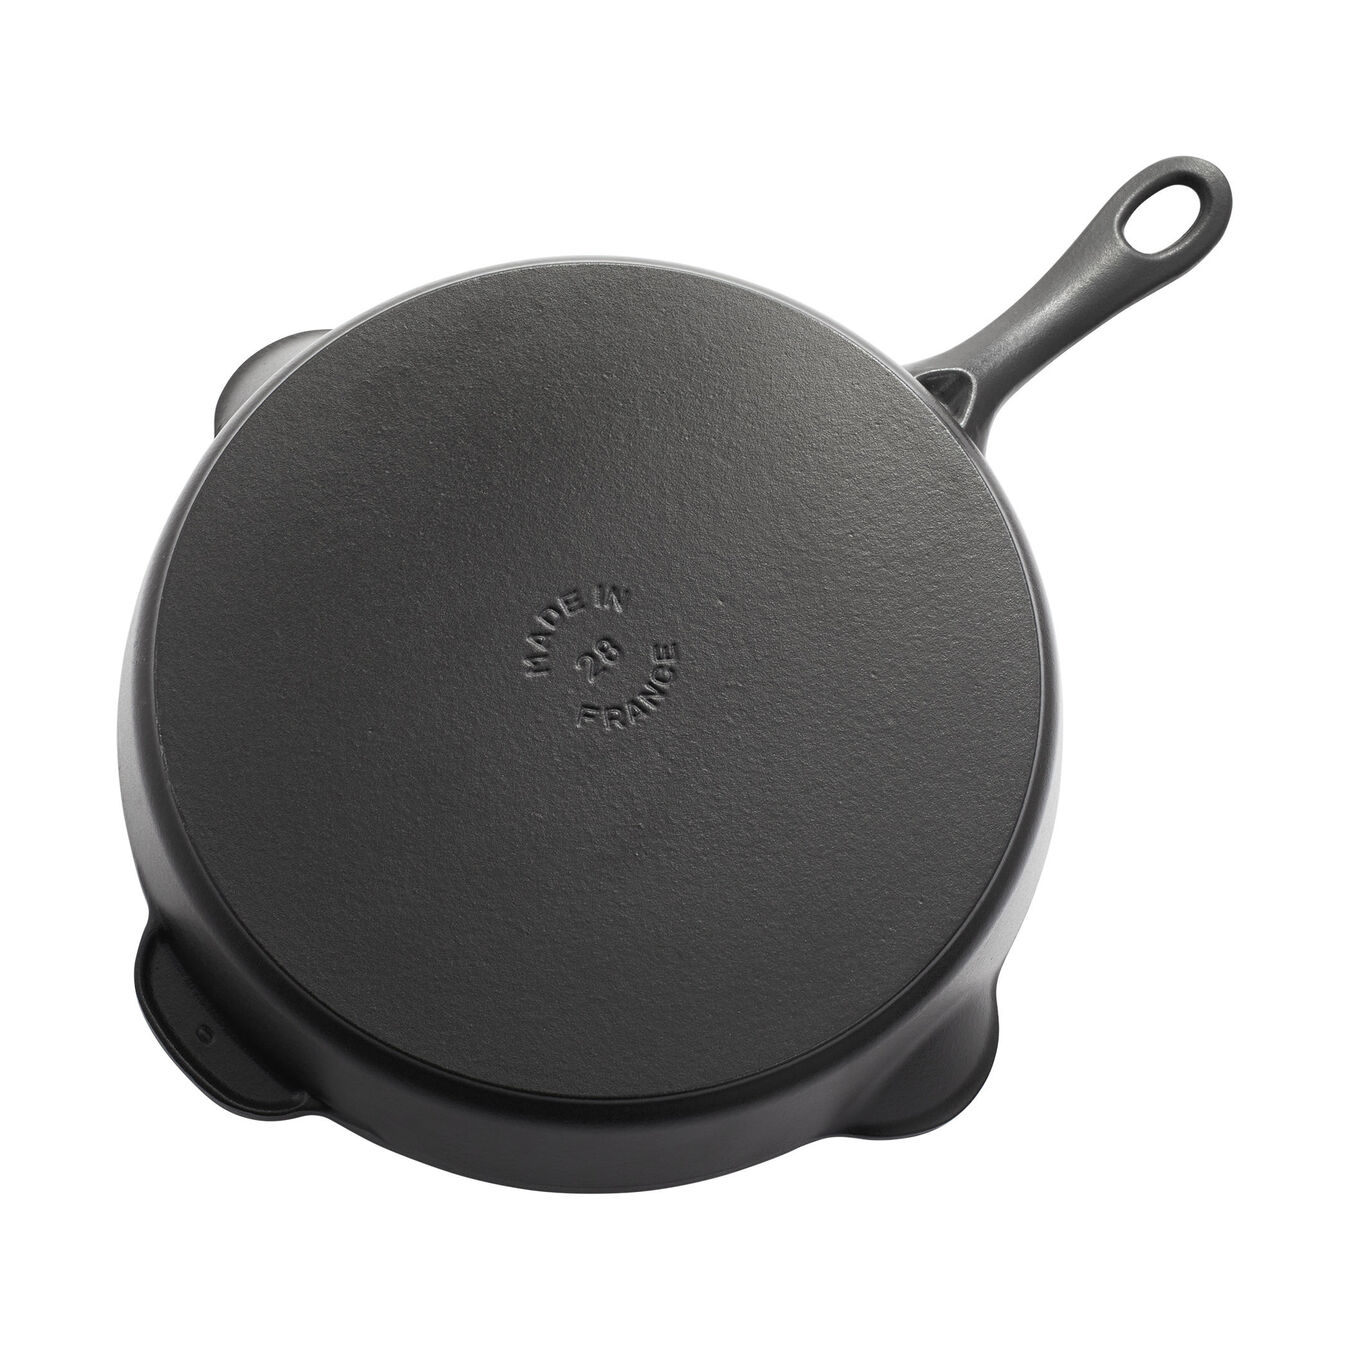 28 cm / 11 inch cast iron Traditional Deep Frypan, black,,large 4